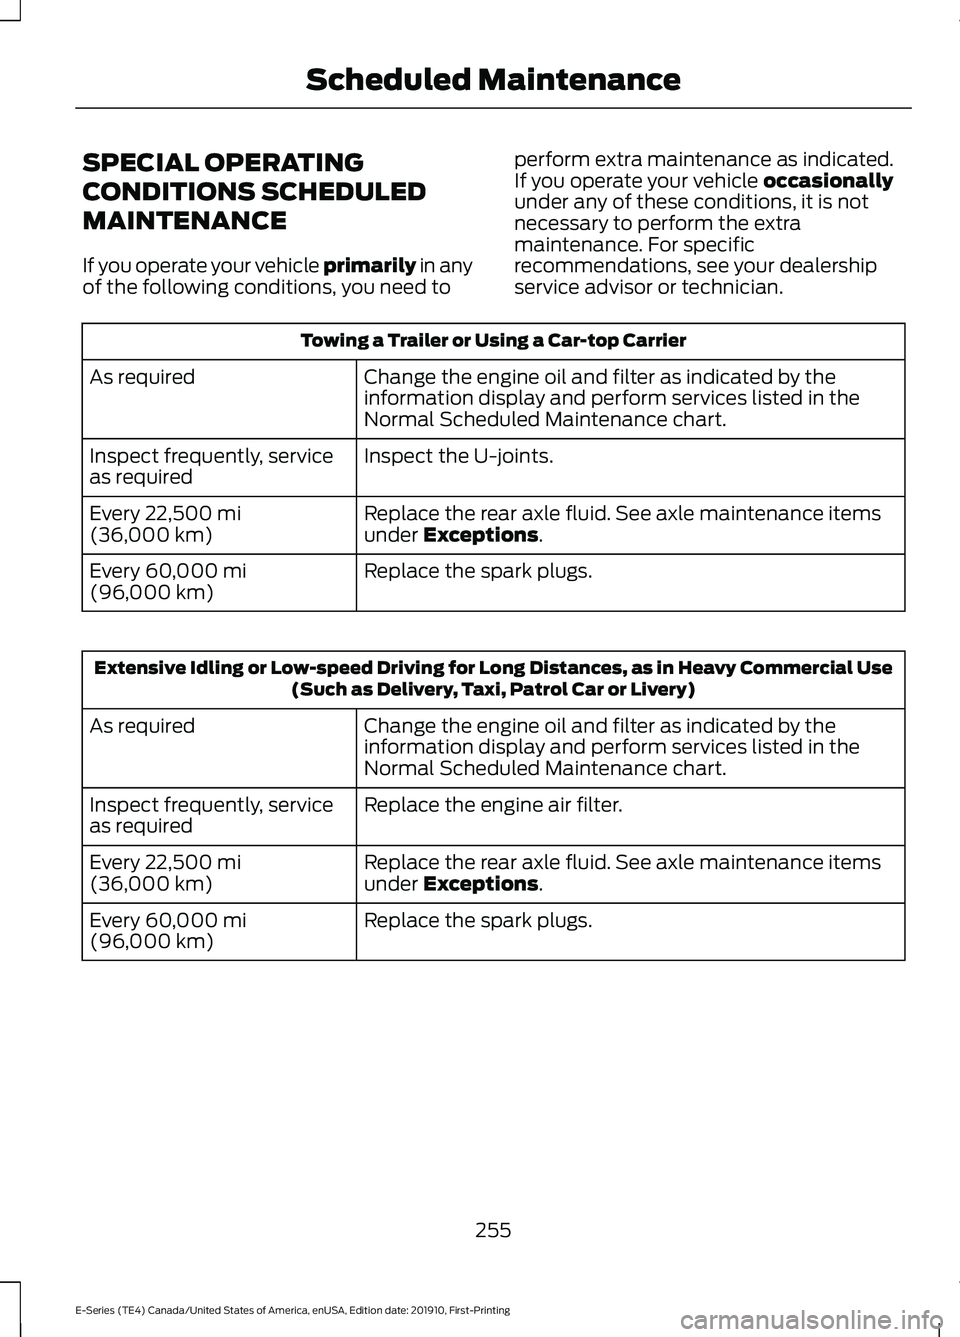 FORD E-350 2021  Owners Manual SPECIAL OPERATING
CONDITIONS SCHEDULED
MAINTENANCE
If you operate your vehicle primarily in any
of the following conditions, you need to perform extra maintenance as indicated.
If you operate your veh